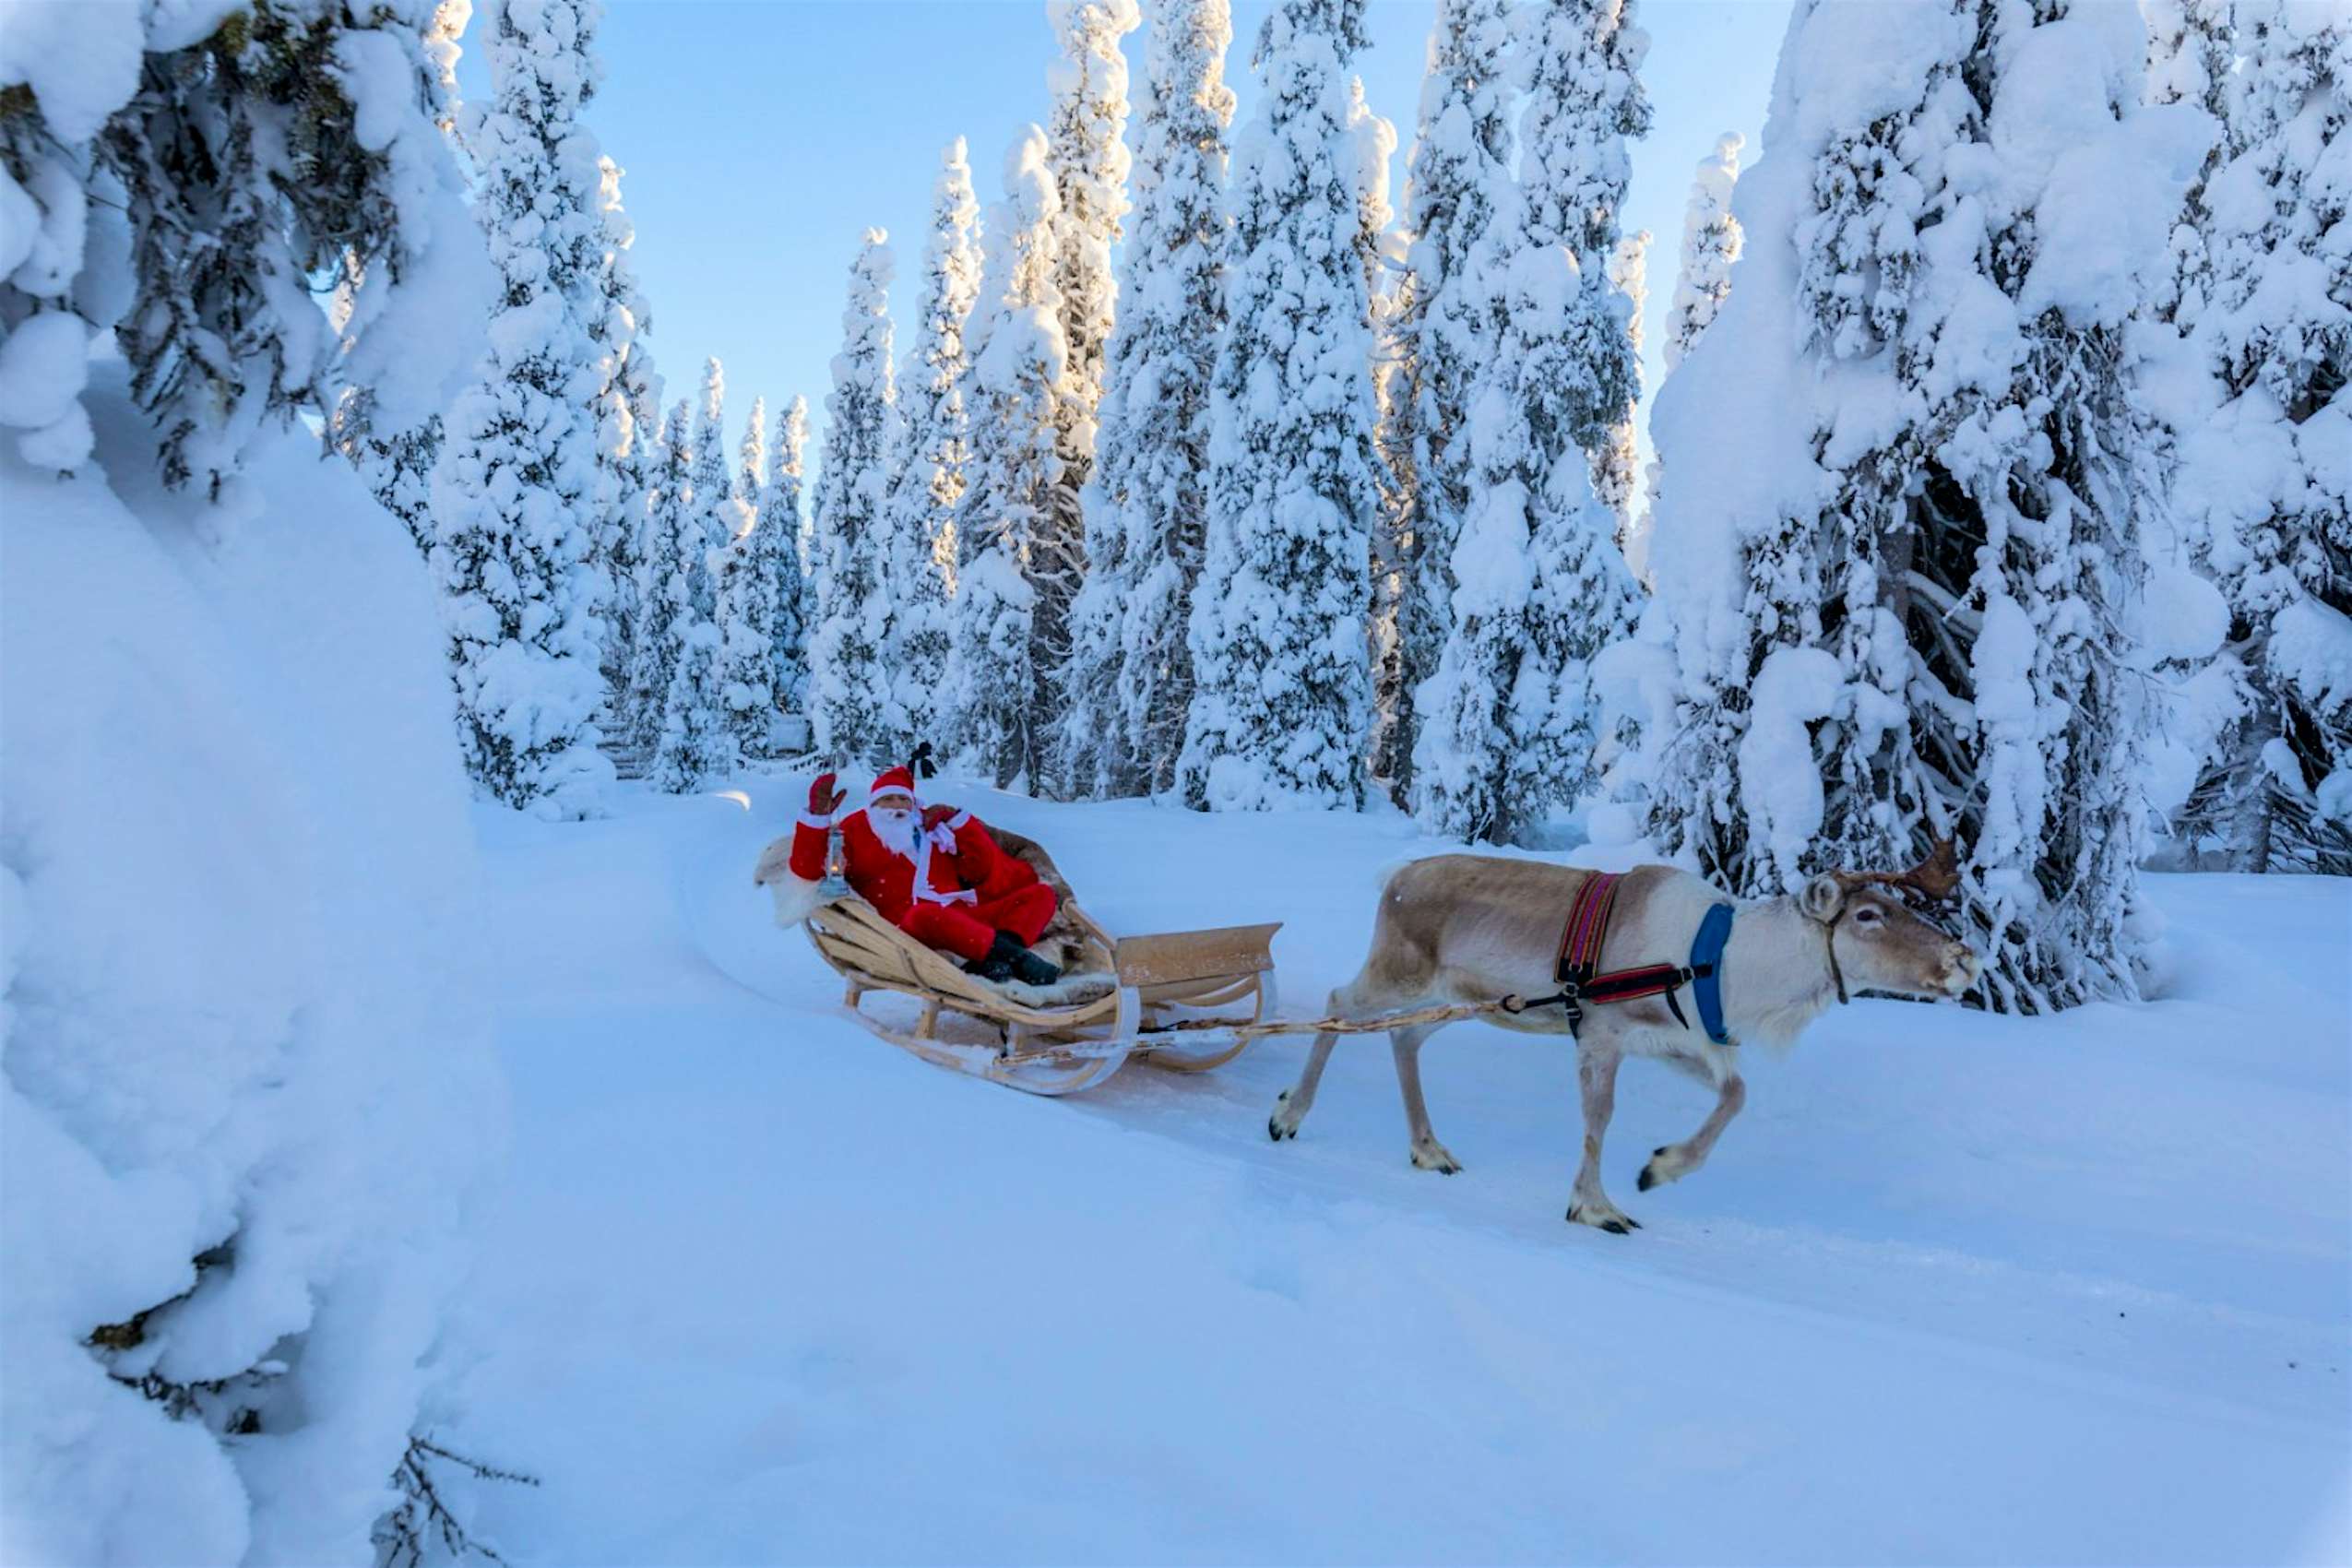 Rising temperatures mean there isn't much snow in Lapland this Christmas